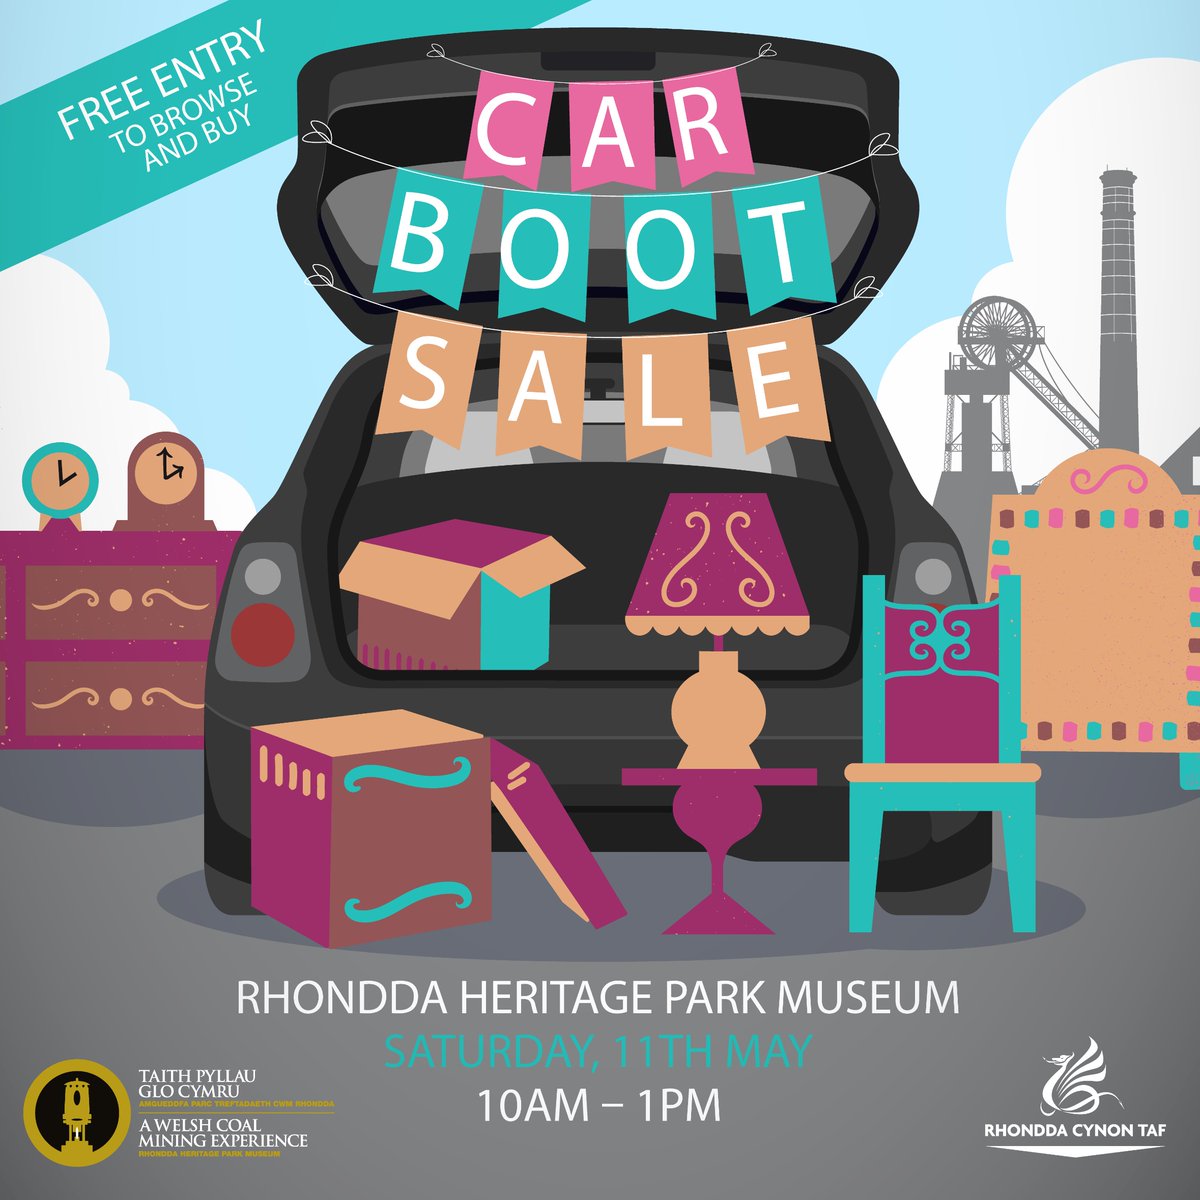 Our next car boot sale is on Saturday 11th May. We have a few spaces left for sellers so if you’re having a spring clean, book your car in here and come along! 👉 orlo.uk/nyC4W